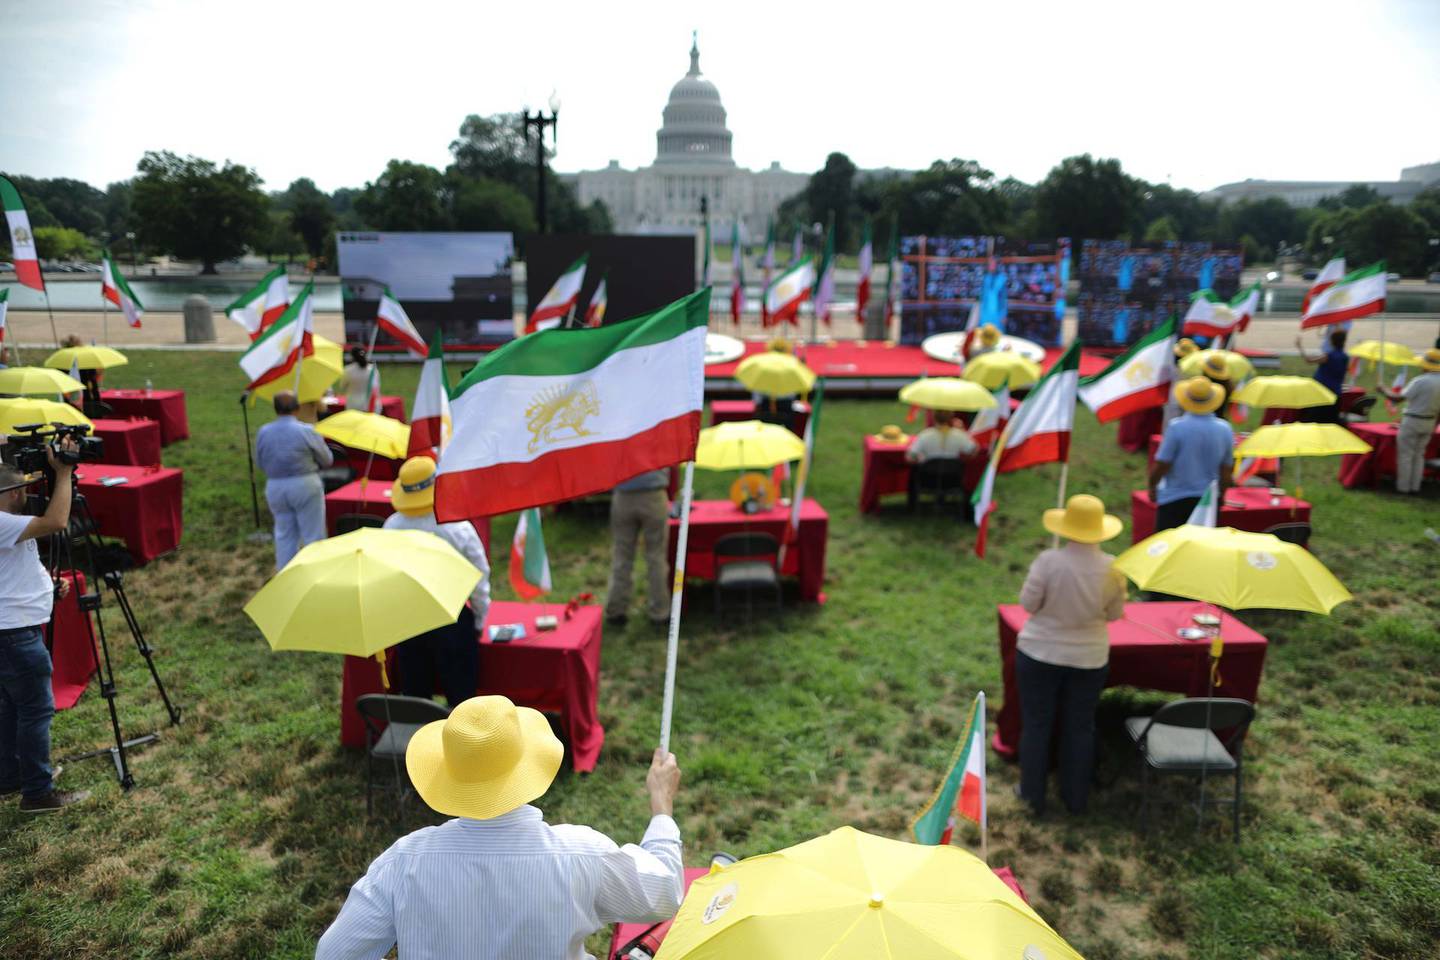 WASHINGTON, DC - JULY 17: Sitting at tables spaced out to reduce possible transmission of the novel coronavirus, Iranian-Americans gather under yellow umbrellas on the west side of the U.S. Capitol to demonstrate in support of a free Iran July 17, 2020 in Washington, DC. According to organizers, the demonstrators joined a global simulcast from 30,000 locations across 102 countries in support of a 'Free Iran.'   Chip Somodevilla/Getty Images/AFP
== FOR NEWSPAPERS, INTERNET, TELCOS & TELEVISION USE ONLY ==
